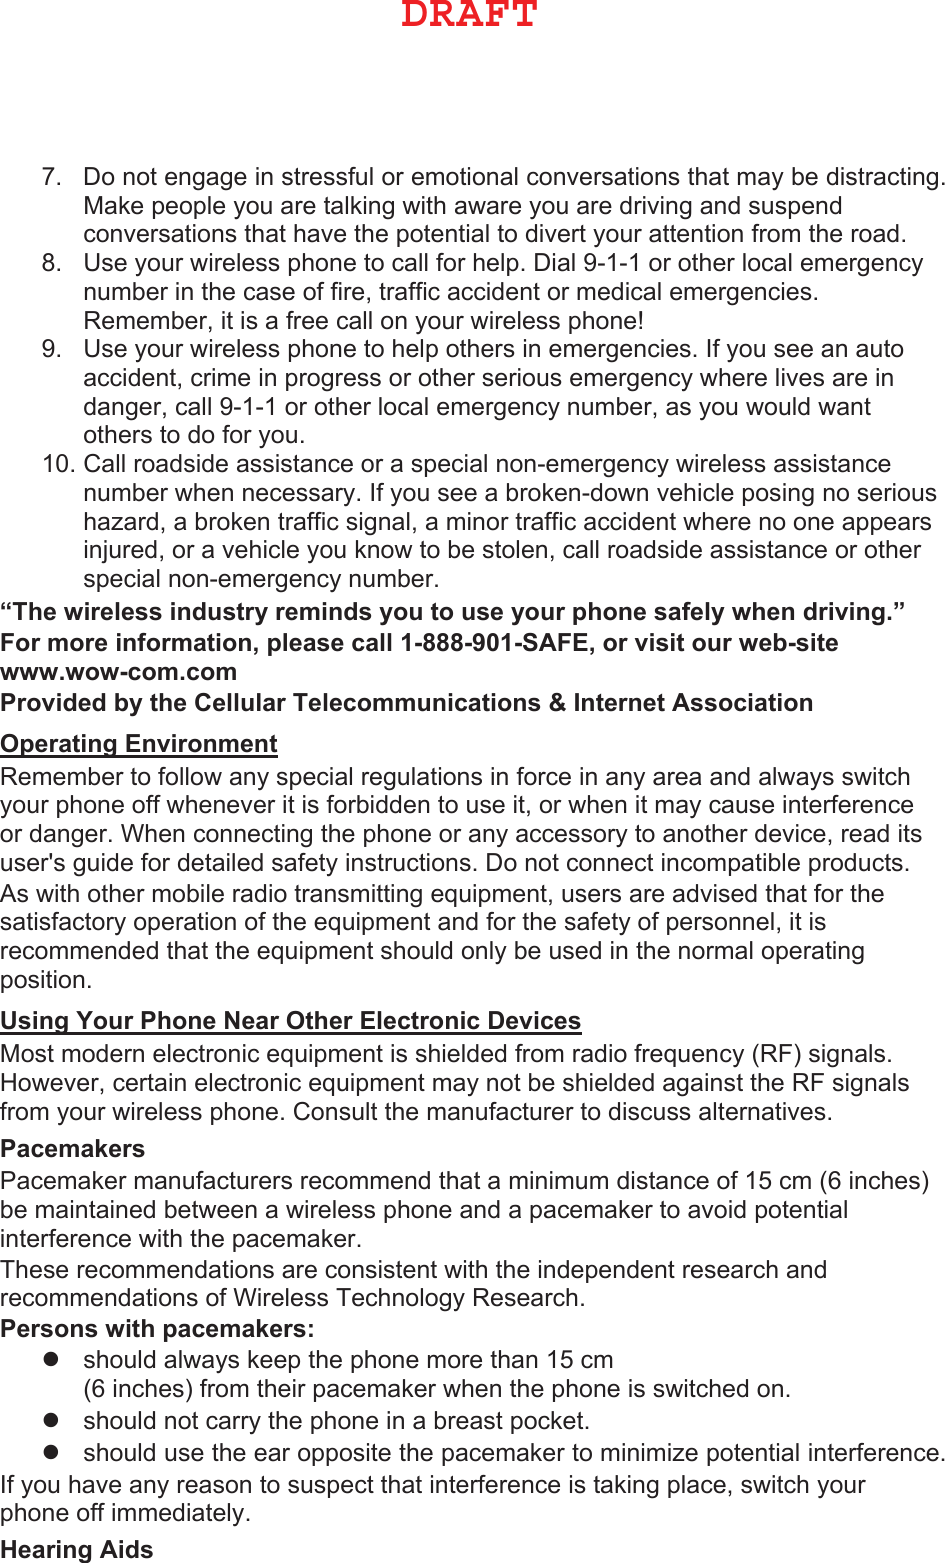 7. Do not engage in stressful or emotional conversations that may be distracting.Make people you are talking with aware you are driving and suspendconversations that have the potential to divert your attention from the road.8. Use your wireless phone to call for help. Dial 9-1-1 or other local emergencynumber in the case of fire, traffic accident or medical emergencies.Remember, it is a free call on your wireless phone!9. Use your wireless phone to help others in emergencies. If you see an autoaccident, crime in progress or other serious emergency where lives are indanger, call 9-1-1 or other local emergency number, as you would wantothers to do for you.10. Call roadside assistance or a special non-emergency wireless assistancenumber when necessary. If you see a broken-down vehicle posing no serioushazard, a broken traffic signal, a minor traffic accident where no one appearsinjured, or a vehicle you know to be stolen, call roadside assistance or otherspecial non-emergency number.³7KHZLUHOHVVLQGXVWU\UHPLQGV\RXWRXVH\RXUSKRQHVDIHO\ZKHQGULYLQJ´ )RUPRUHLQIRUPDWLRQSOHDVHFDOO6$)(RUYLVLWRXUZHEVLWHZZZZRZFRPFRP 3URYLGHGE\WKH&amp;HOOXODU7HOHFRPPXQLFDWLRQV,QWHUQHW$VVRFLDWLRQ 2SHUDWLQJ(QYLURQPHQW Remember to follow any special regulations in force in any area and always switch your phone off whenever it is forbidden to use it, or when it may cause interference or danger. When connecting the phone or any accessory to another device, read its user&apos;s guide for detailed safety instructions. Do not connect incompatible products.As with other mobile radio transmitting equipment, users are advised that for the satisfactory operation of the equipment and for the safety of personnel, it is recommended that the equipment should only be used in the normal operating position. 8VLQJ&lt;RXU3KRQH1HDU2WKHU(OHFWURQLF&apos;HYLFHV Most modern electronic equipment is shielded from radio frequency (RF) signals. However, certain electronic equipment may not be shielded against the RF signals from your wireless phone. Consult the manufacturer to discuss alternatives. 3DFHPDNHUV Pacemaker manufacturers recommend that a minimum distance of 15 cm (6 inches) be maintained between a wireless phone and a pacemaker to avoid potential interference with the pacemaker. These recommendations are consistent with the independent research and recommendations of Wireless Technology Research. 3HUVRQVZLWKSDFHPDNHUV zshould always keep the phone more than 15 cm(6 inches) from their pacemaker when the phone is switched on.zshould not carry the phone in a breast pocket.zshould use the ear opposite the pacemaker to minimize potential interference.If you have any reason to suspect that interference is taking place, switch your phone off immediately. +HDULQJ$LGV %3&quot;&apos;5